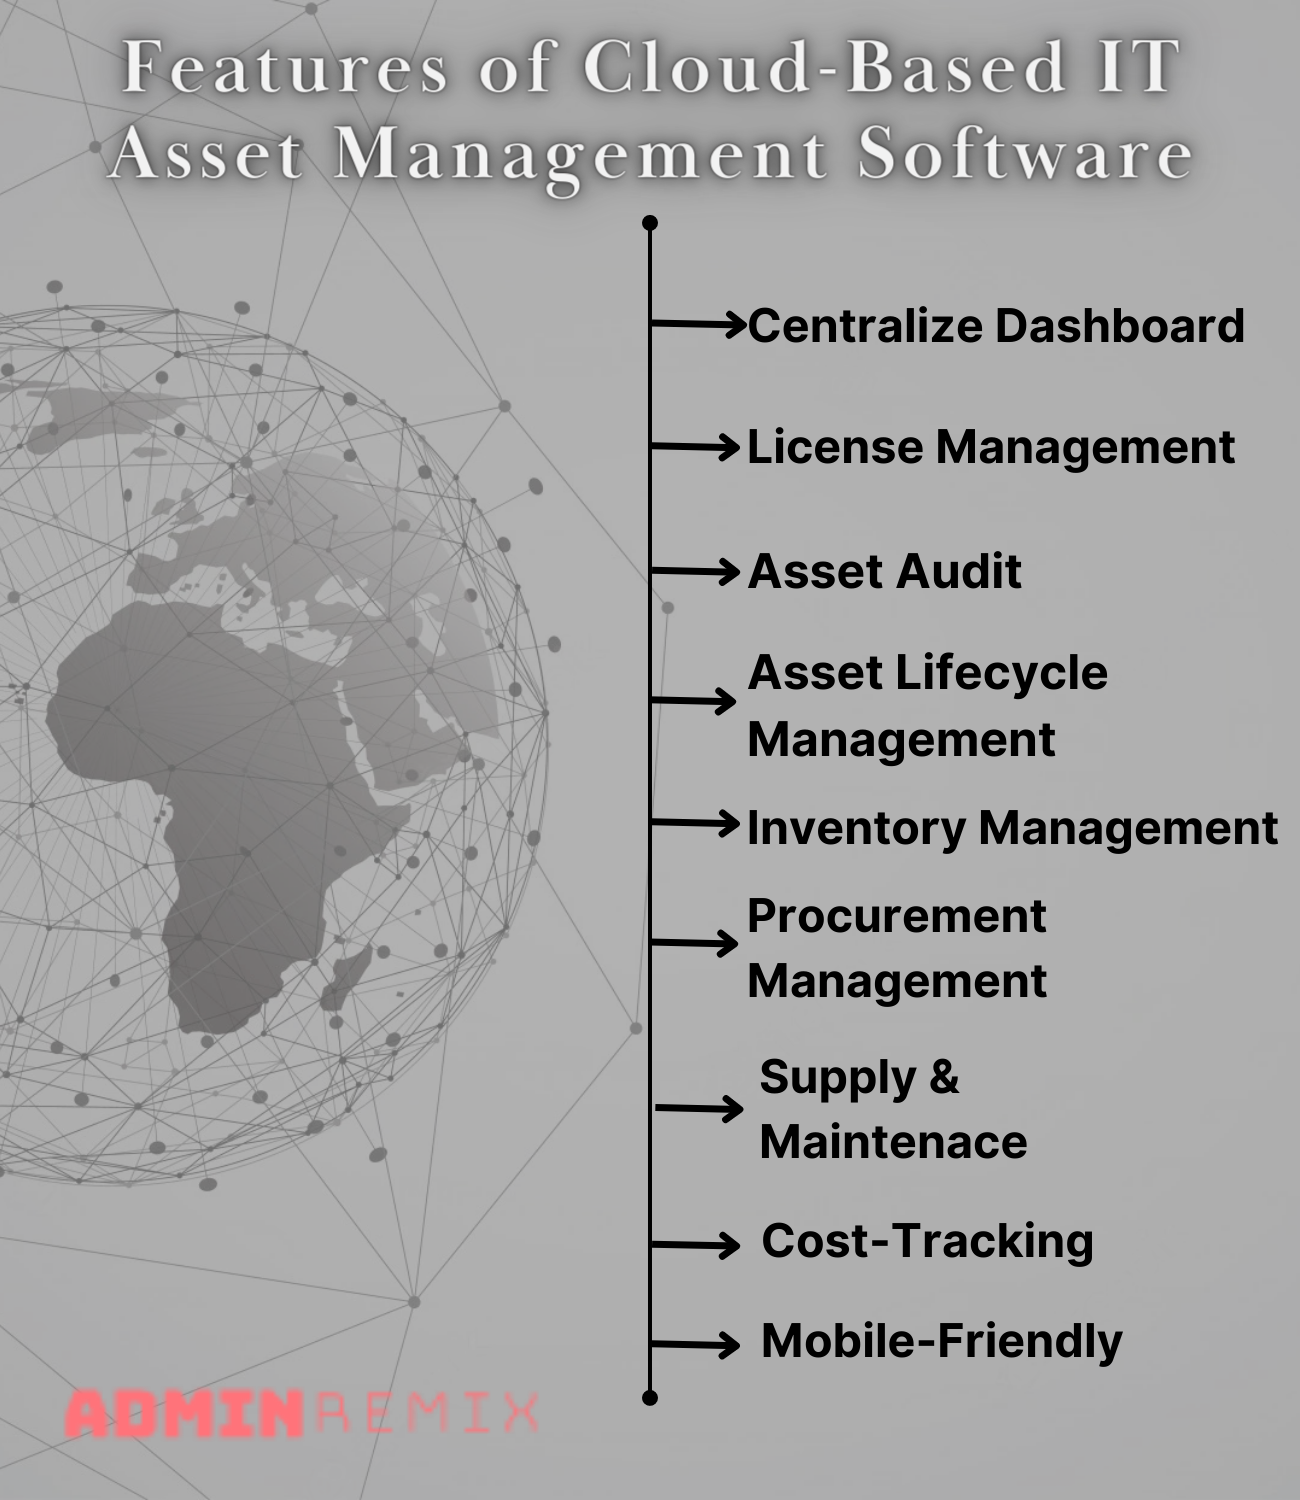 Features of Cloud-Based IT Asset Management Software 2.png